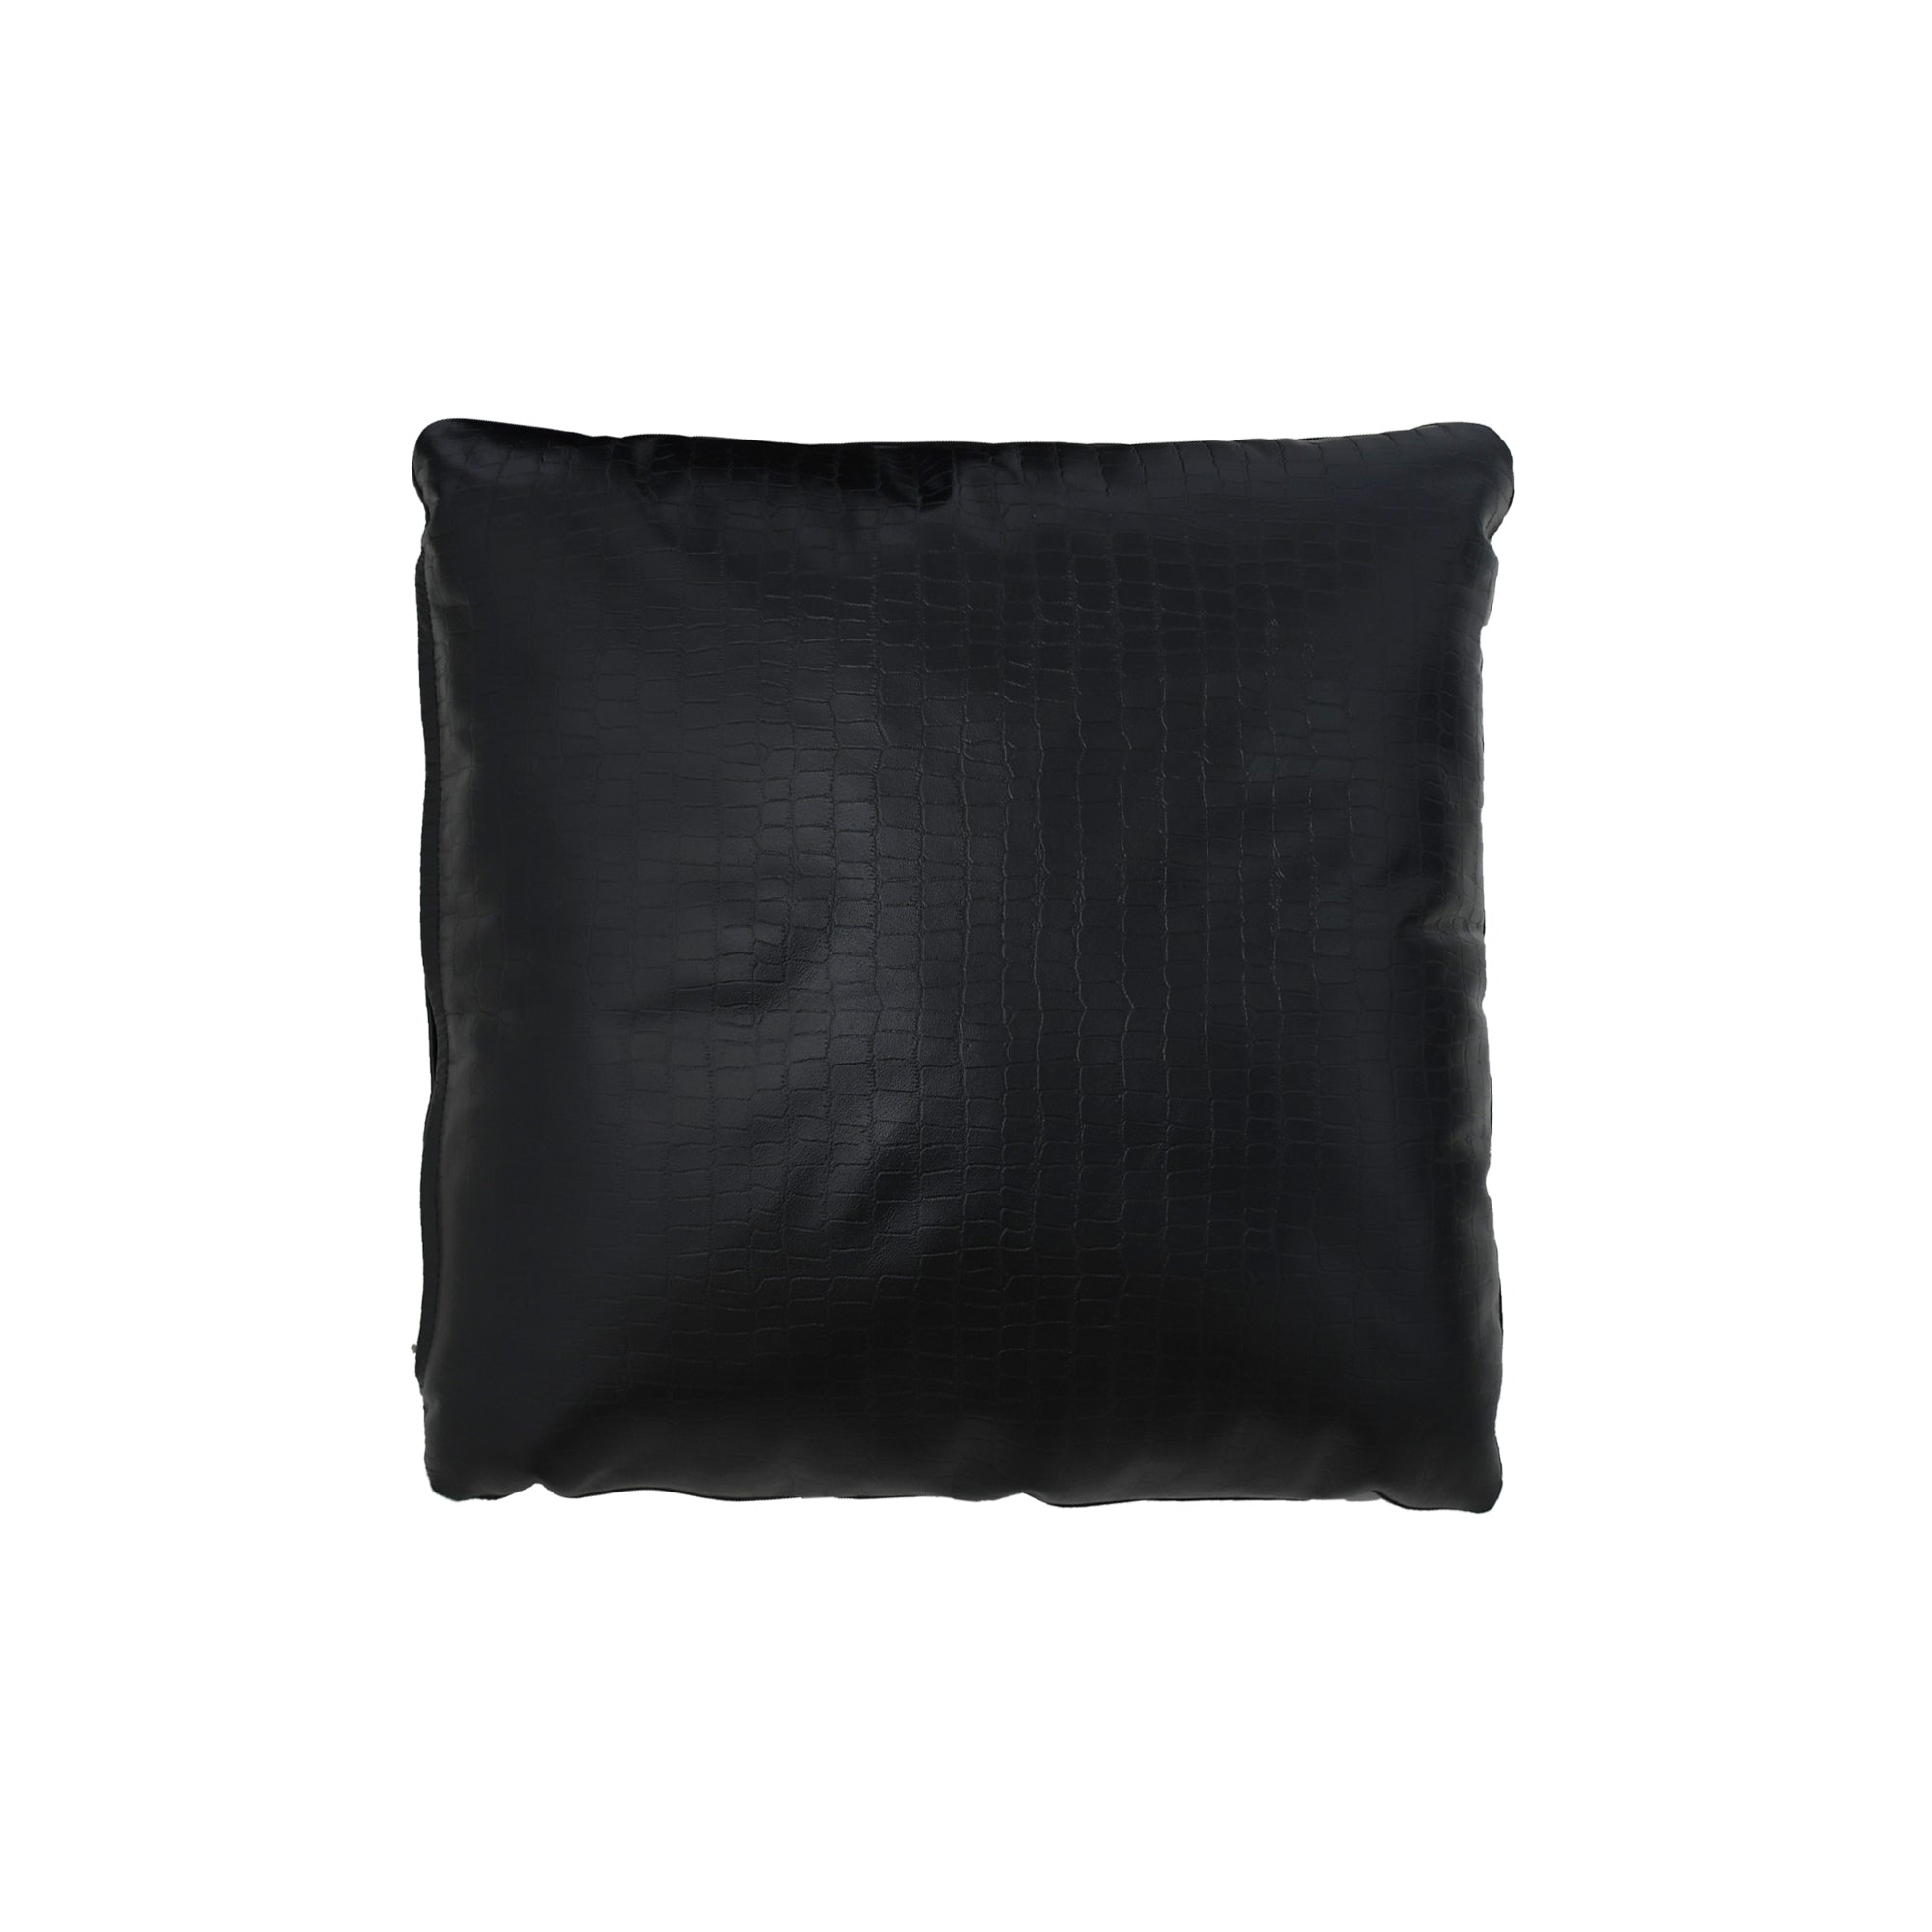 Black Coracoidal Embossed Leather Throw Pillows Front Single